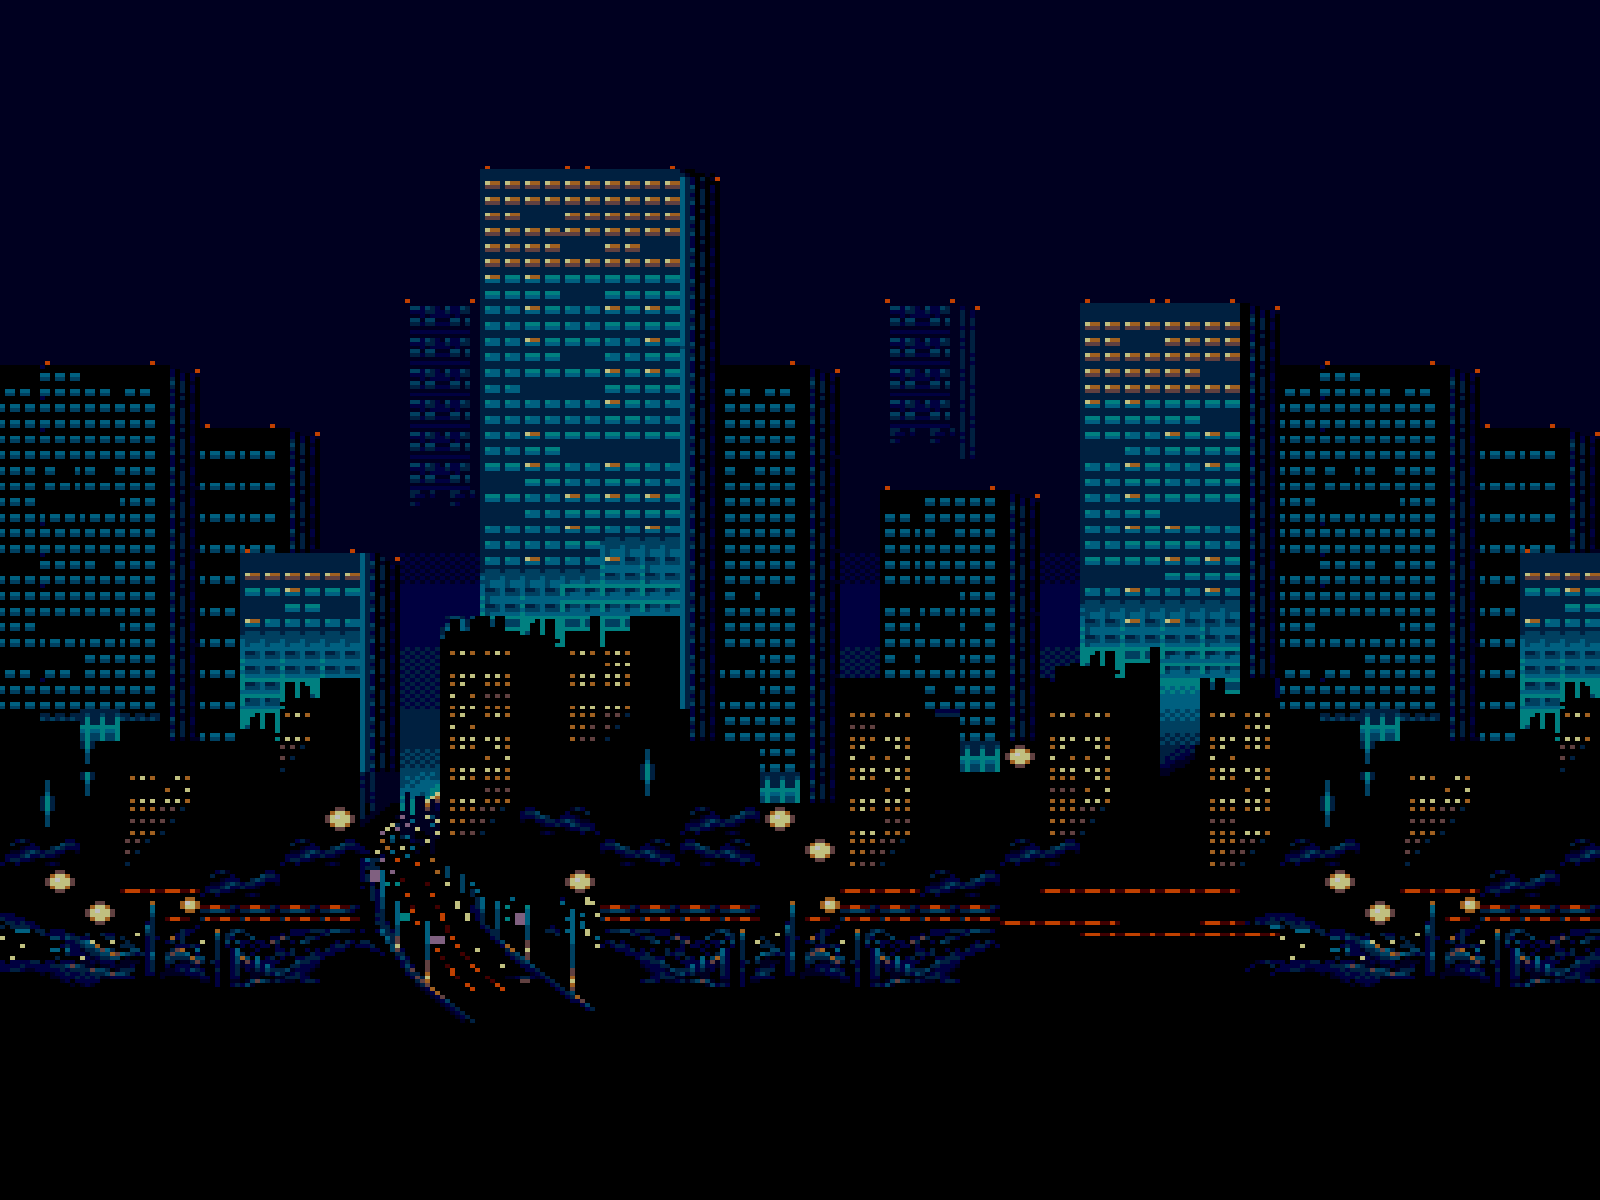 The opening backdrop from Streets of Rage [1600x1200]